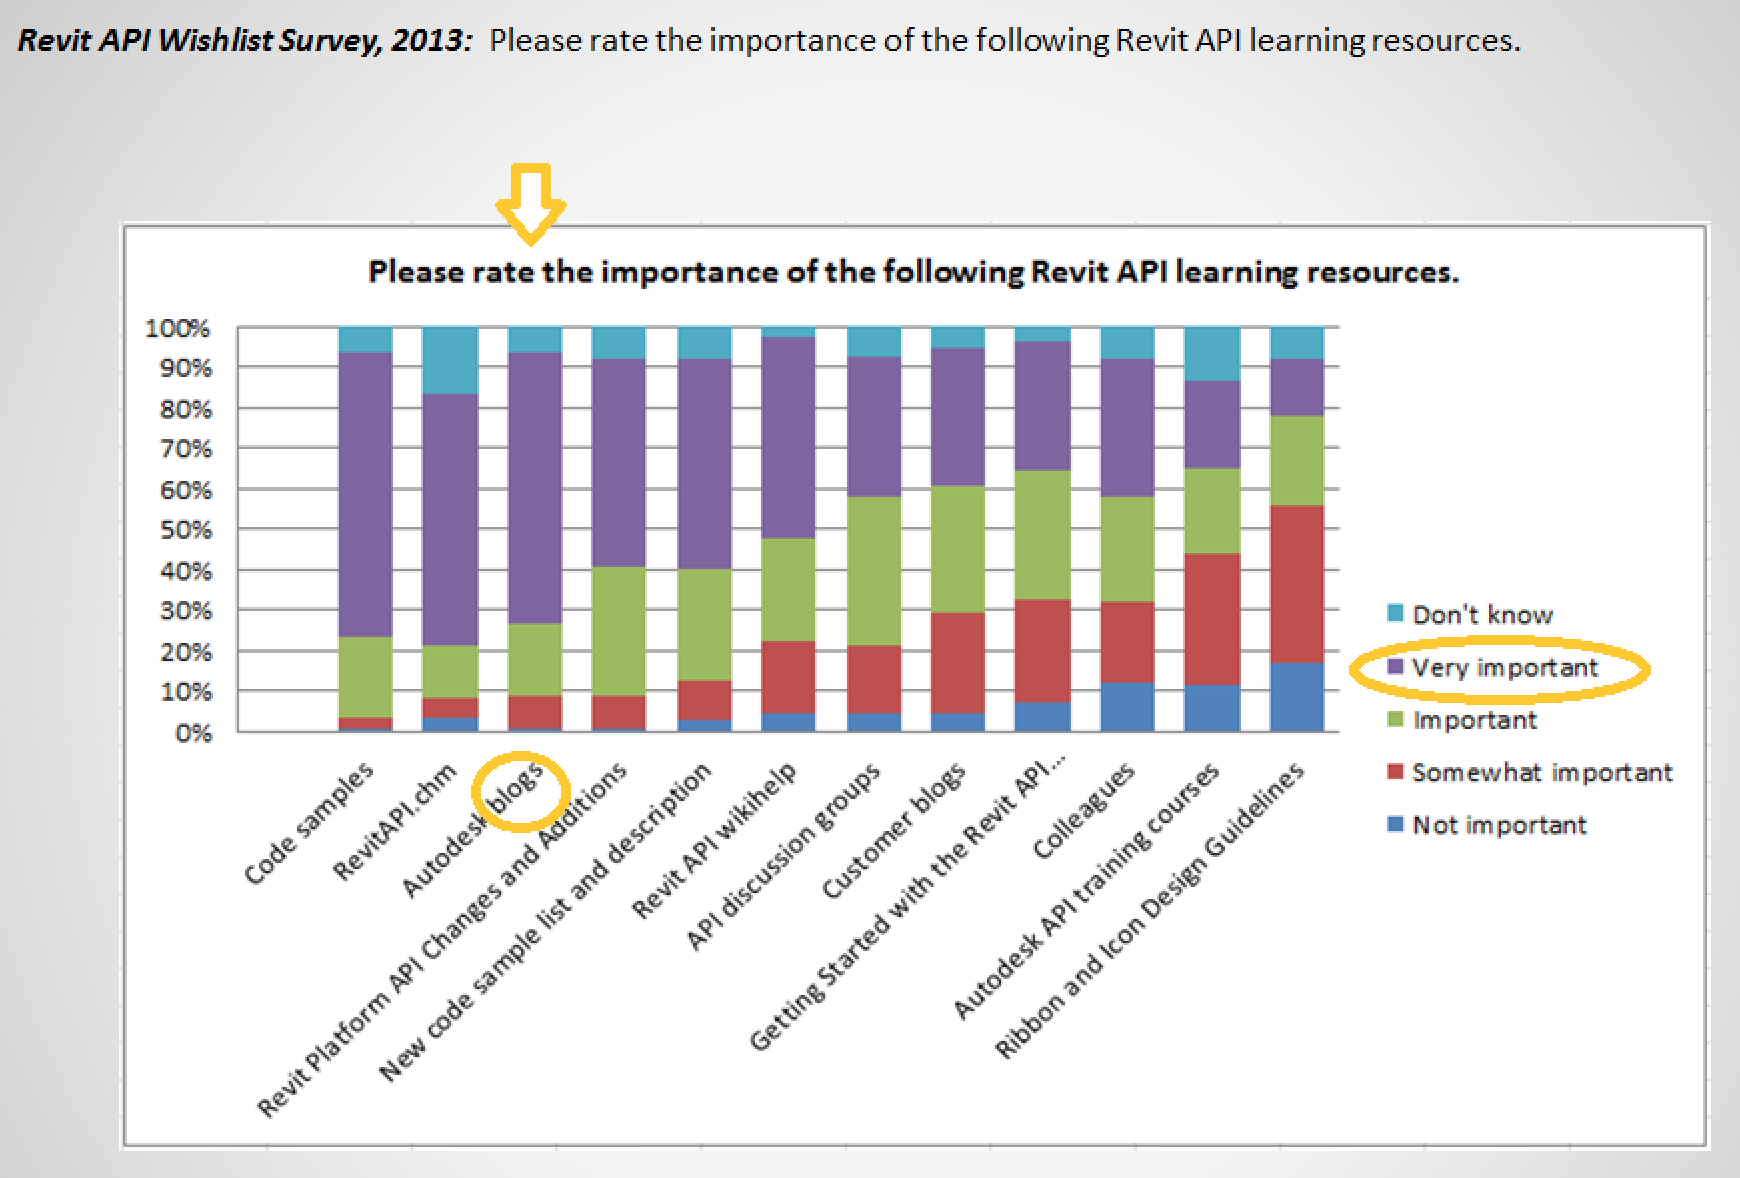 Rating of Revit API learning resources